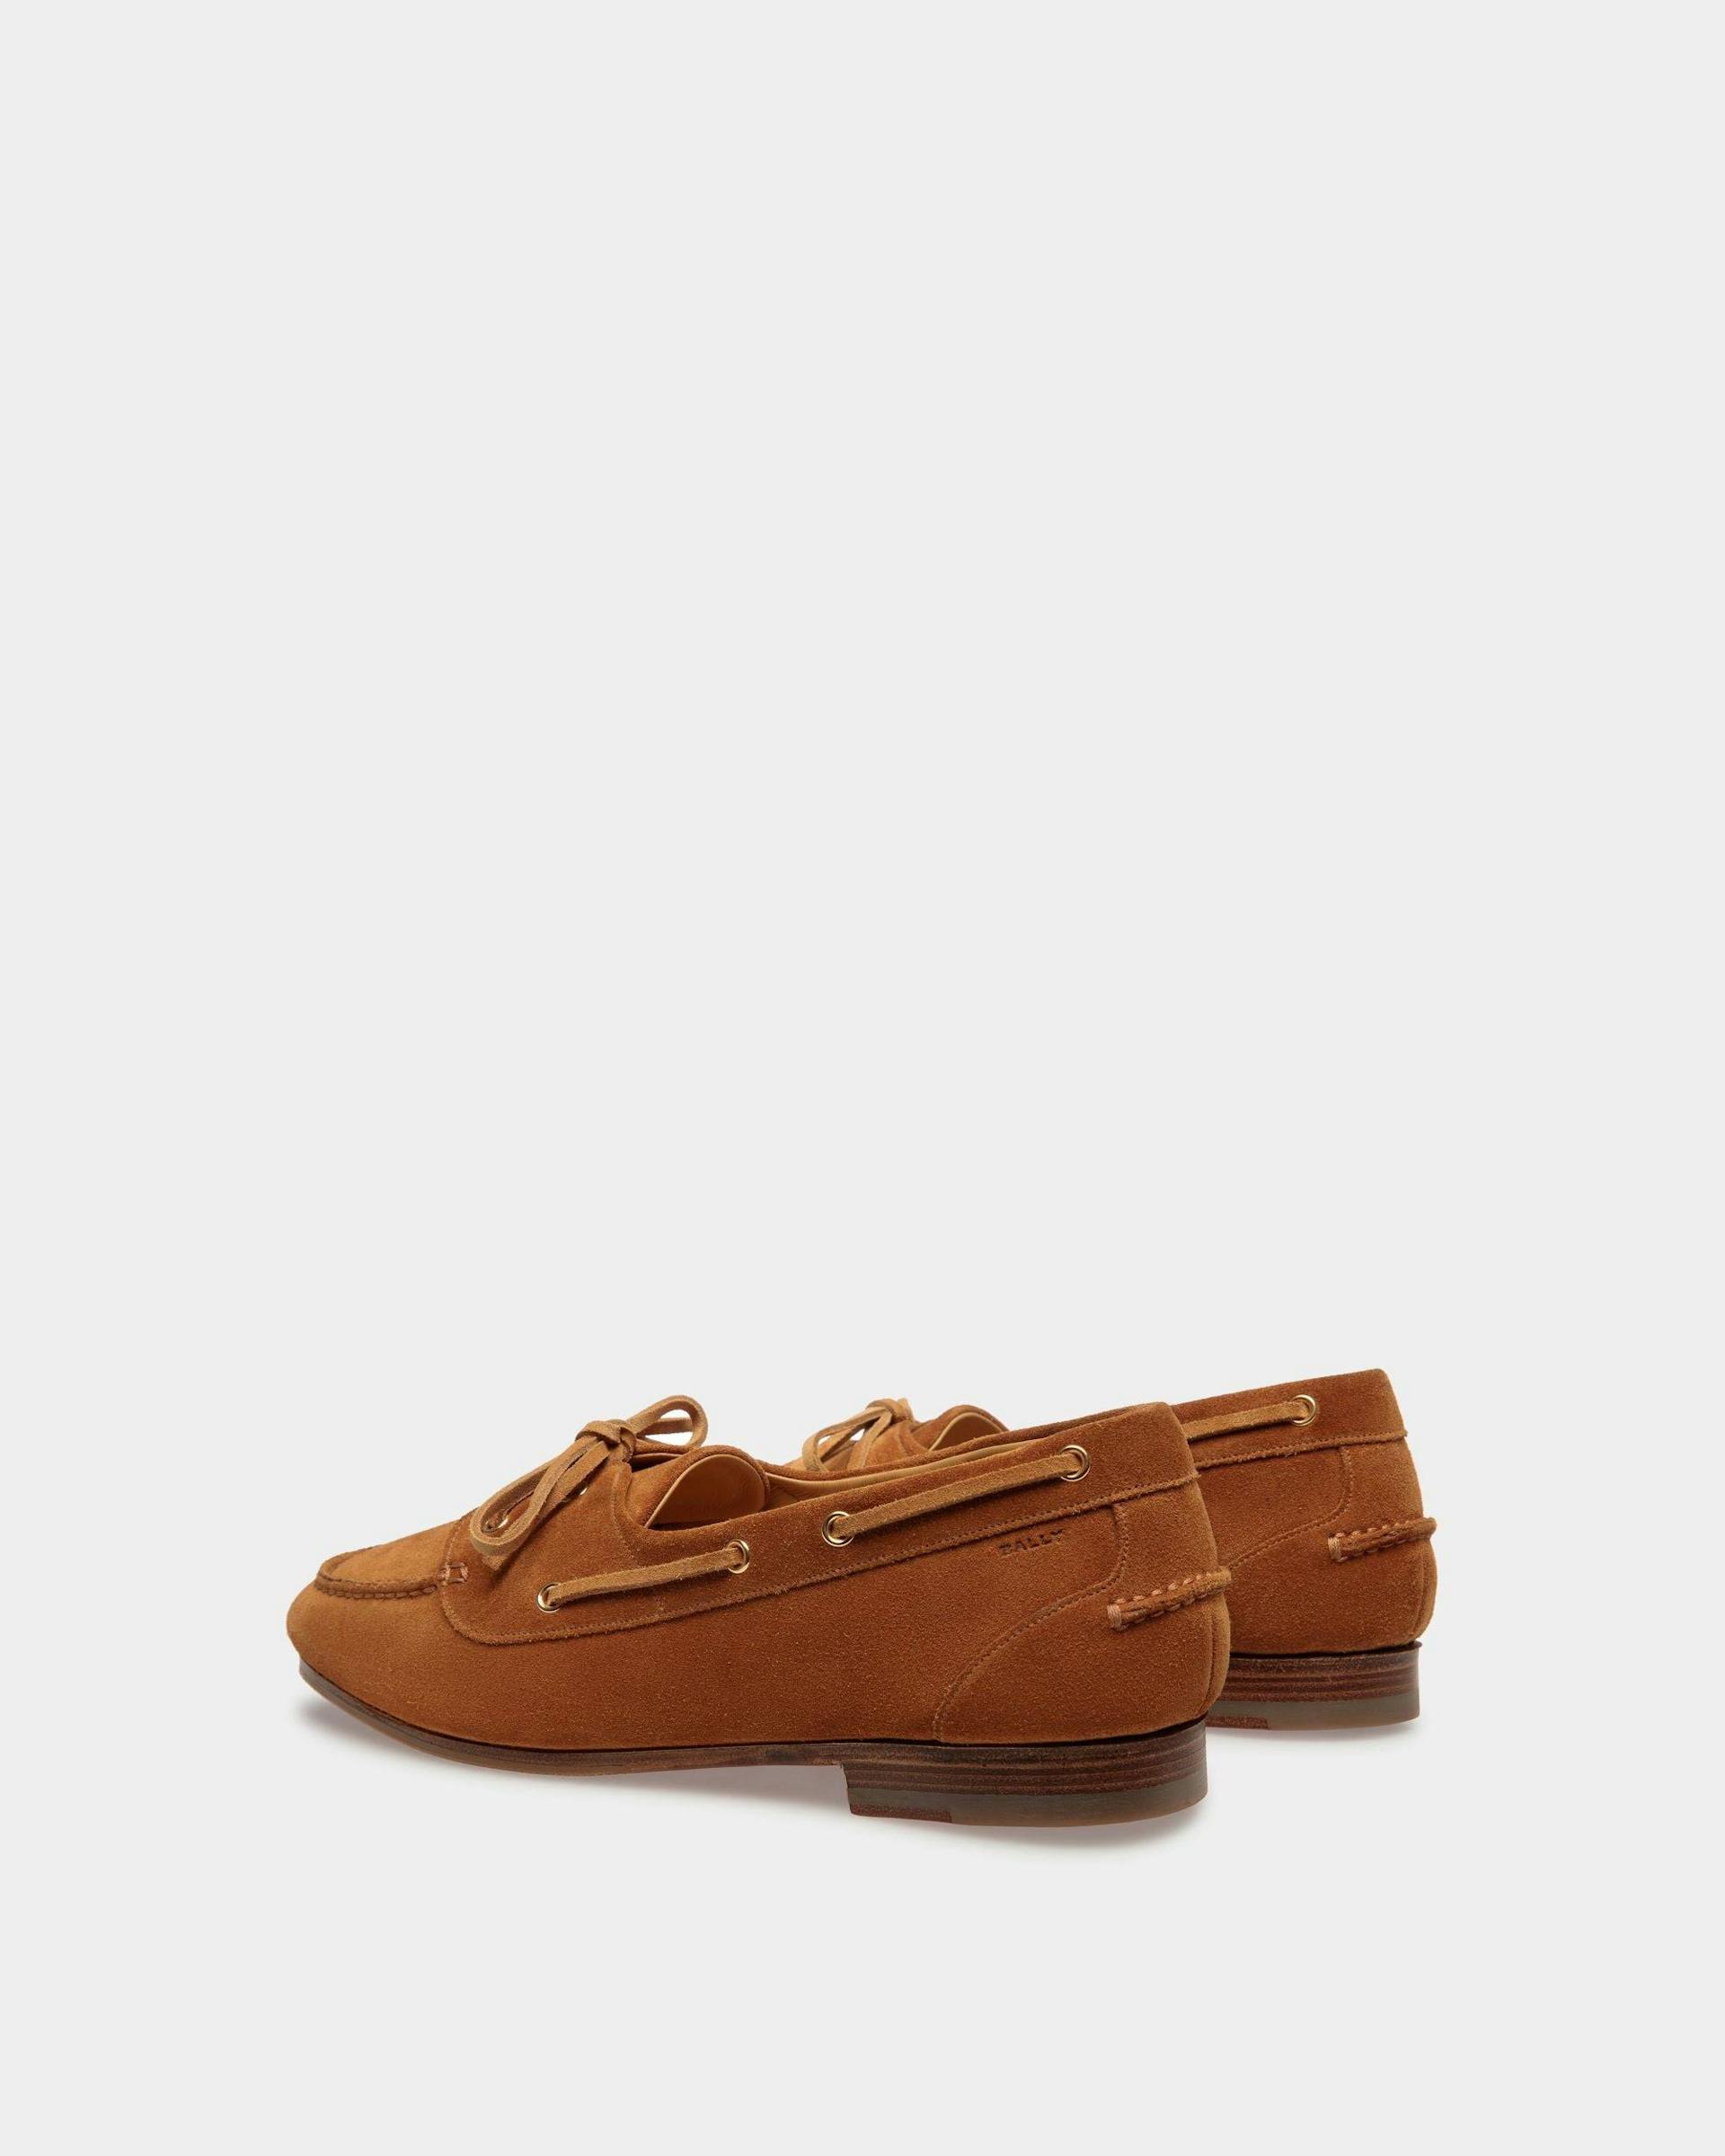 Men's Plume Moccasin in Brown Suede | Bally | Still Life 3/4 Back